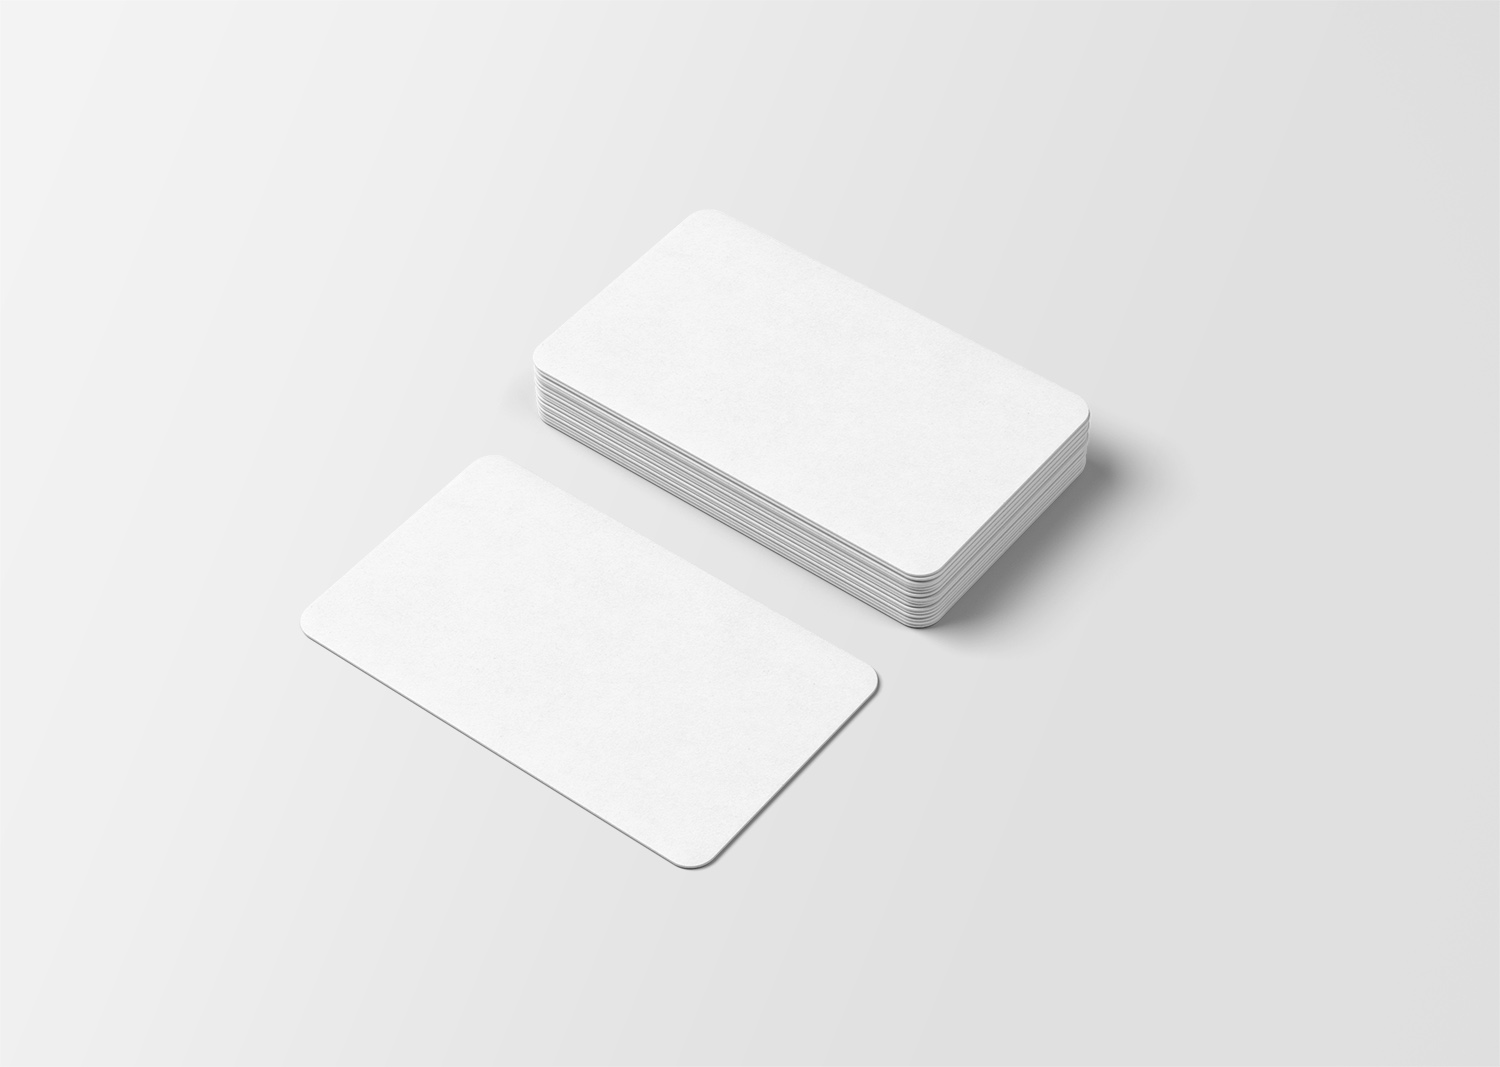 Rounded Corner Business Card Free Mockup